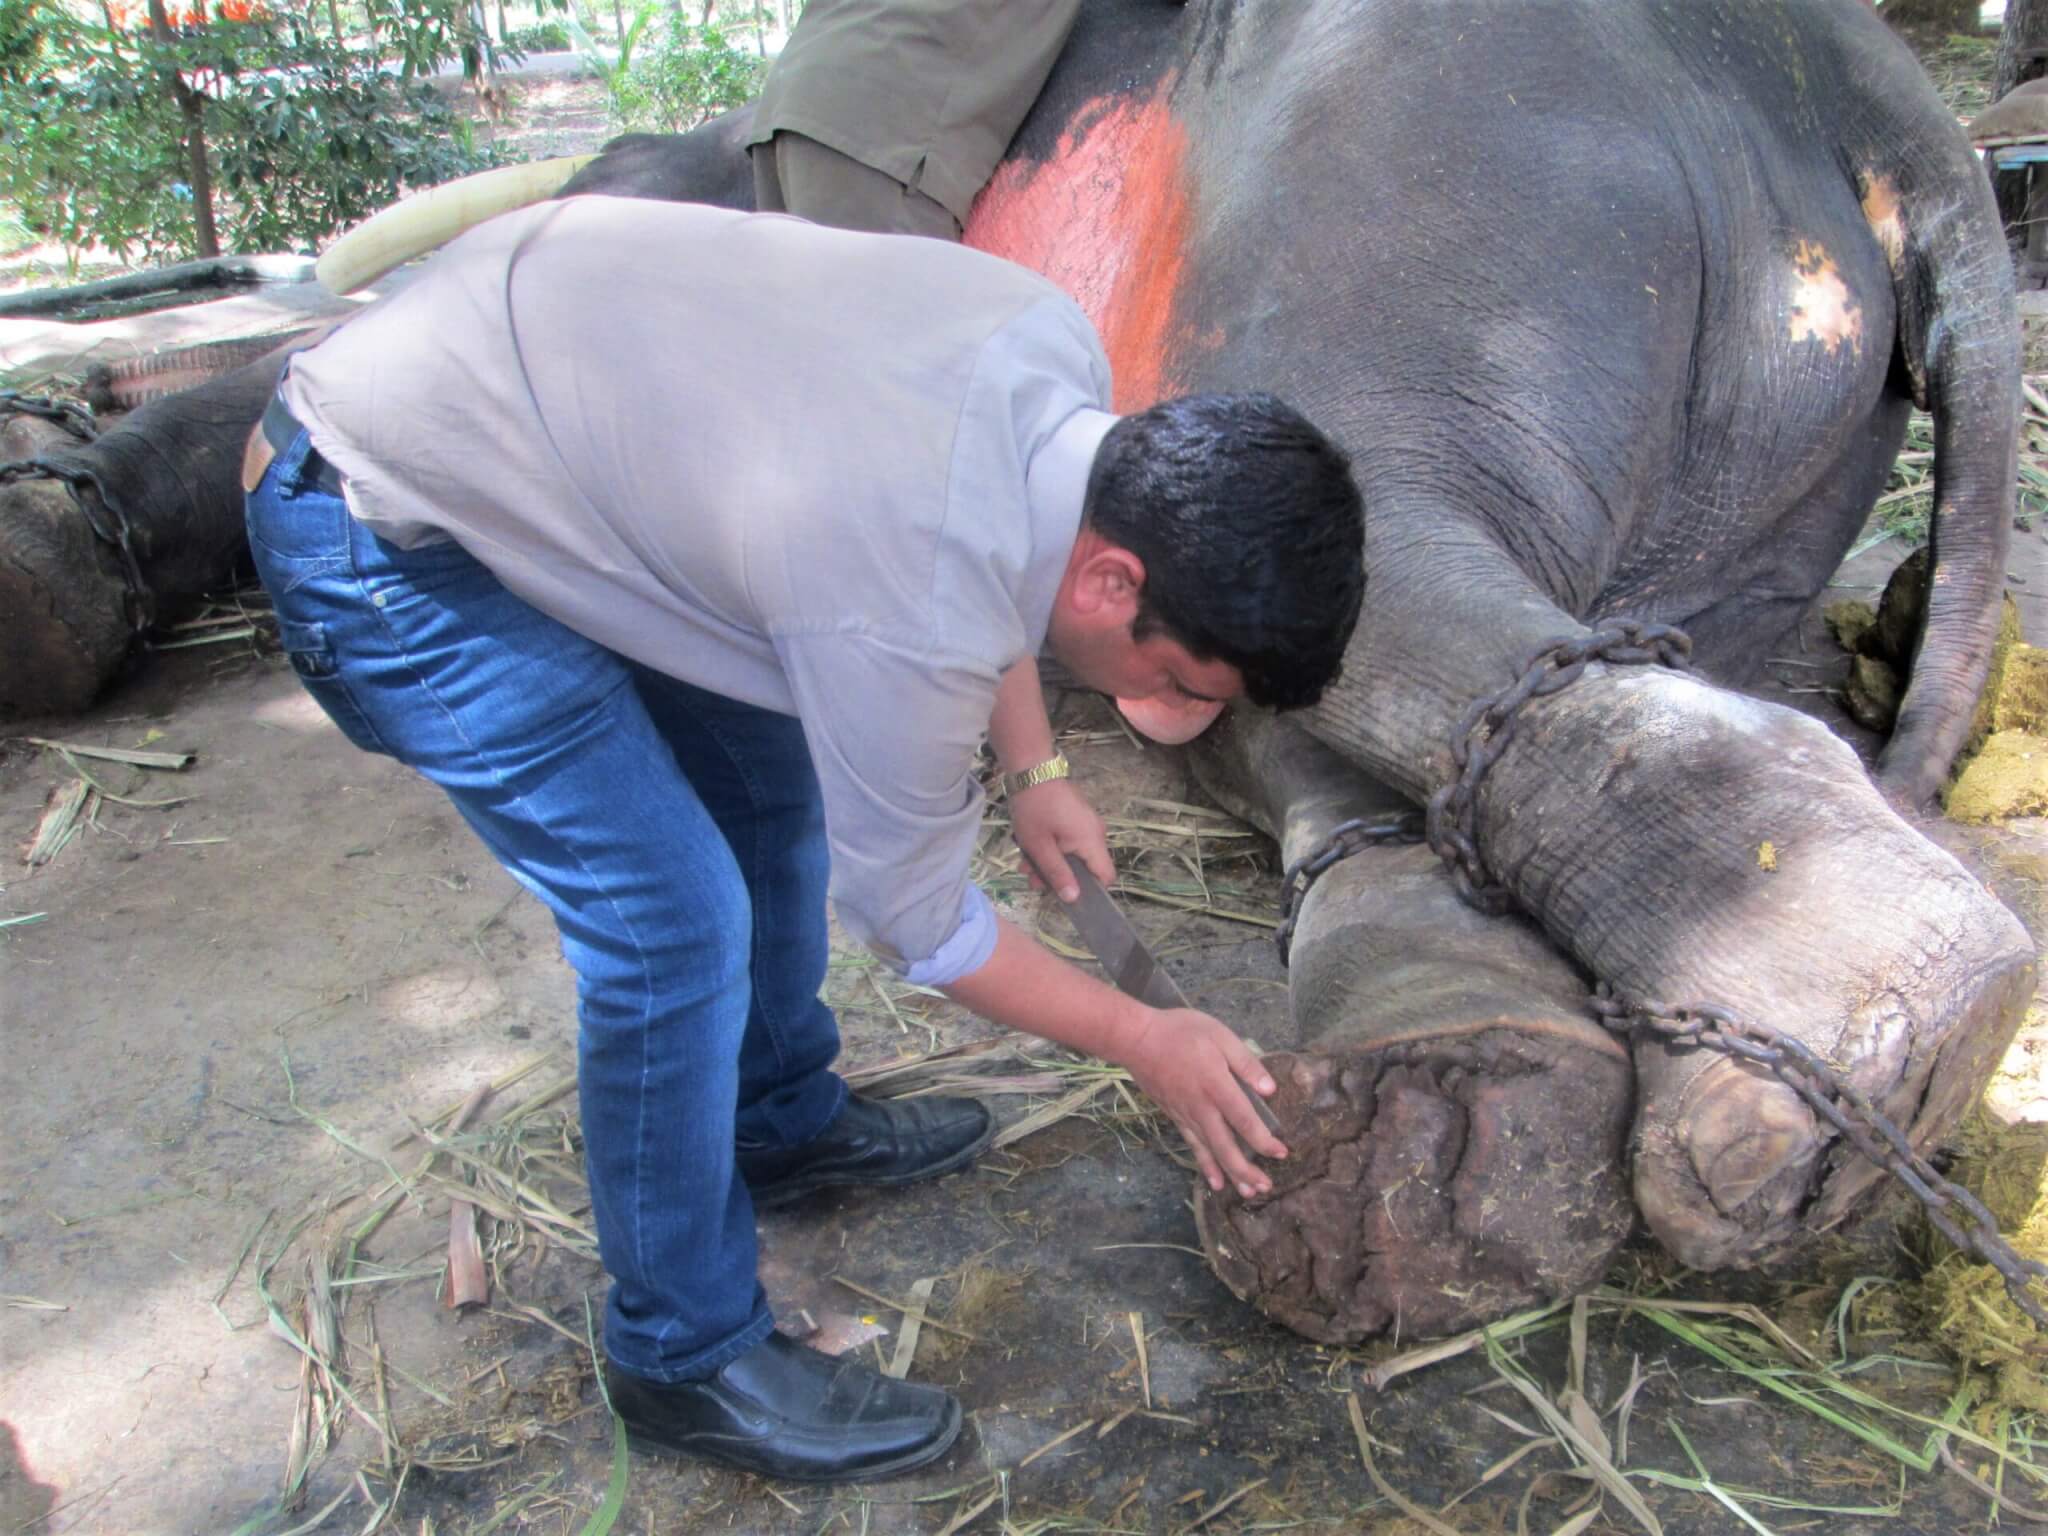 An Animal Rahat veterinarian uses a file to trim Gajraj's nails while he's sedated and chained.